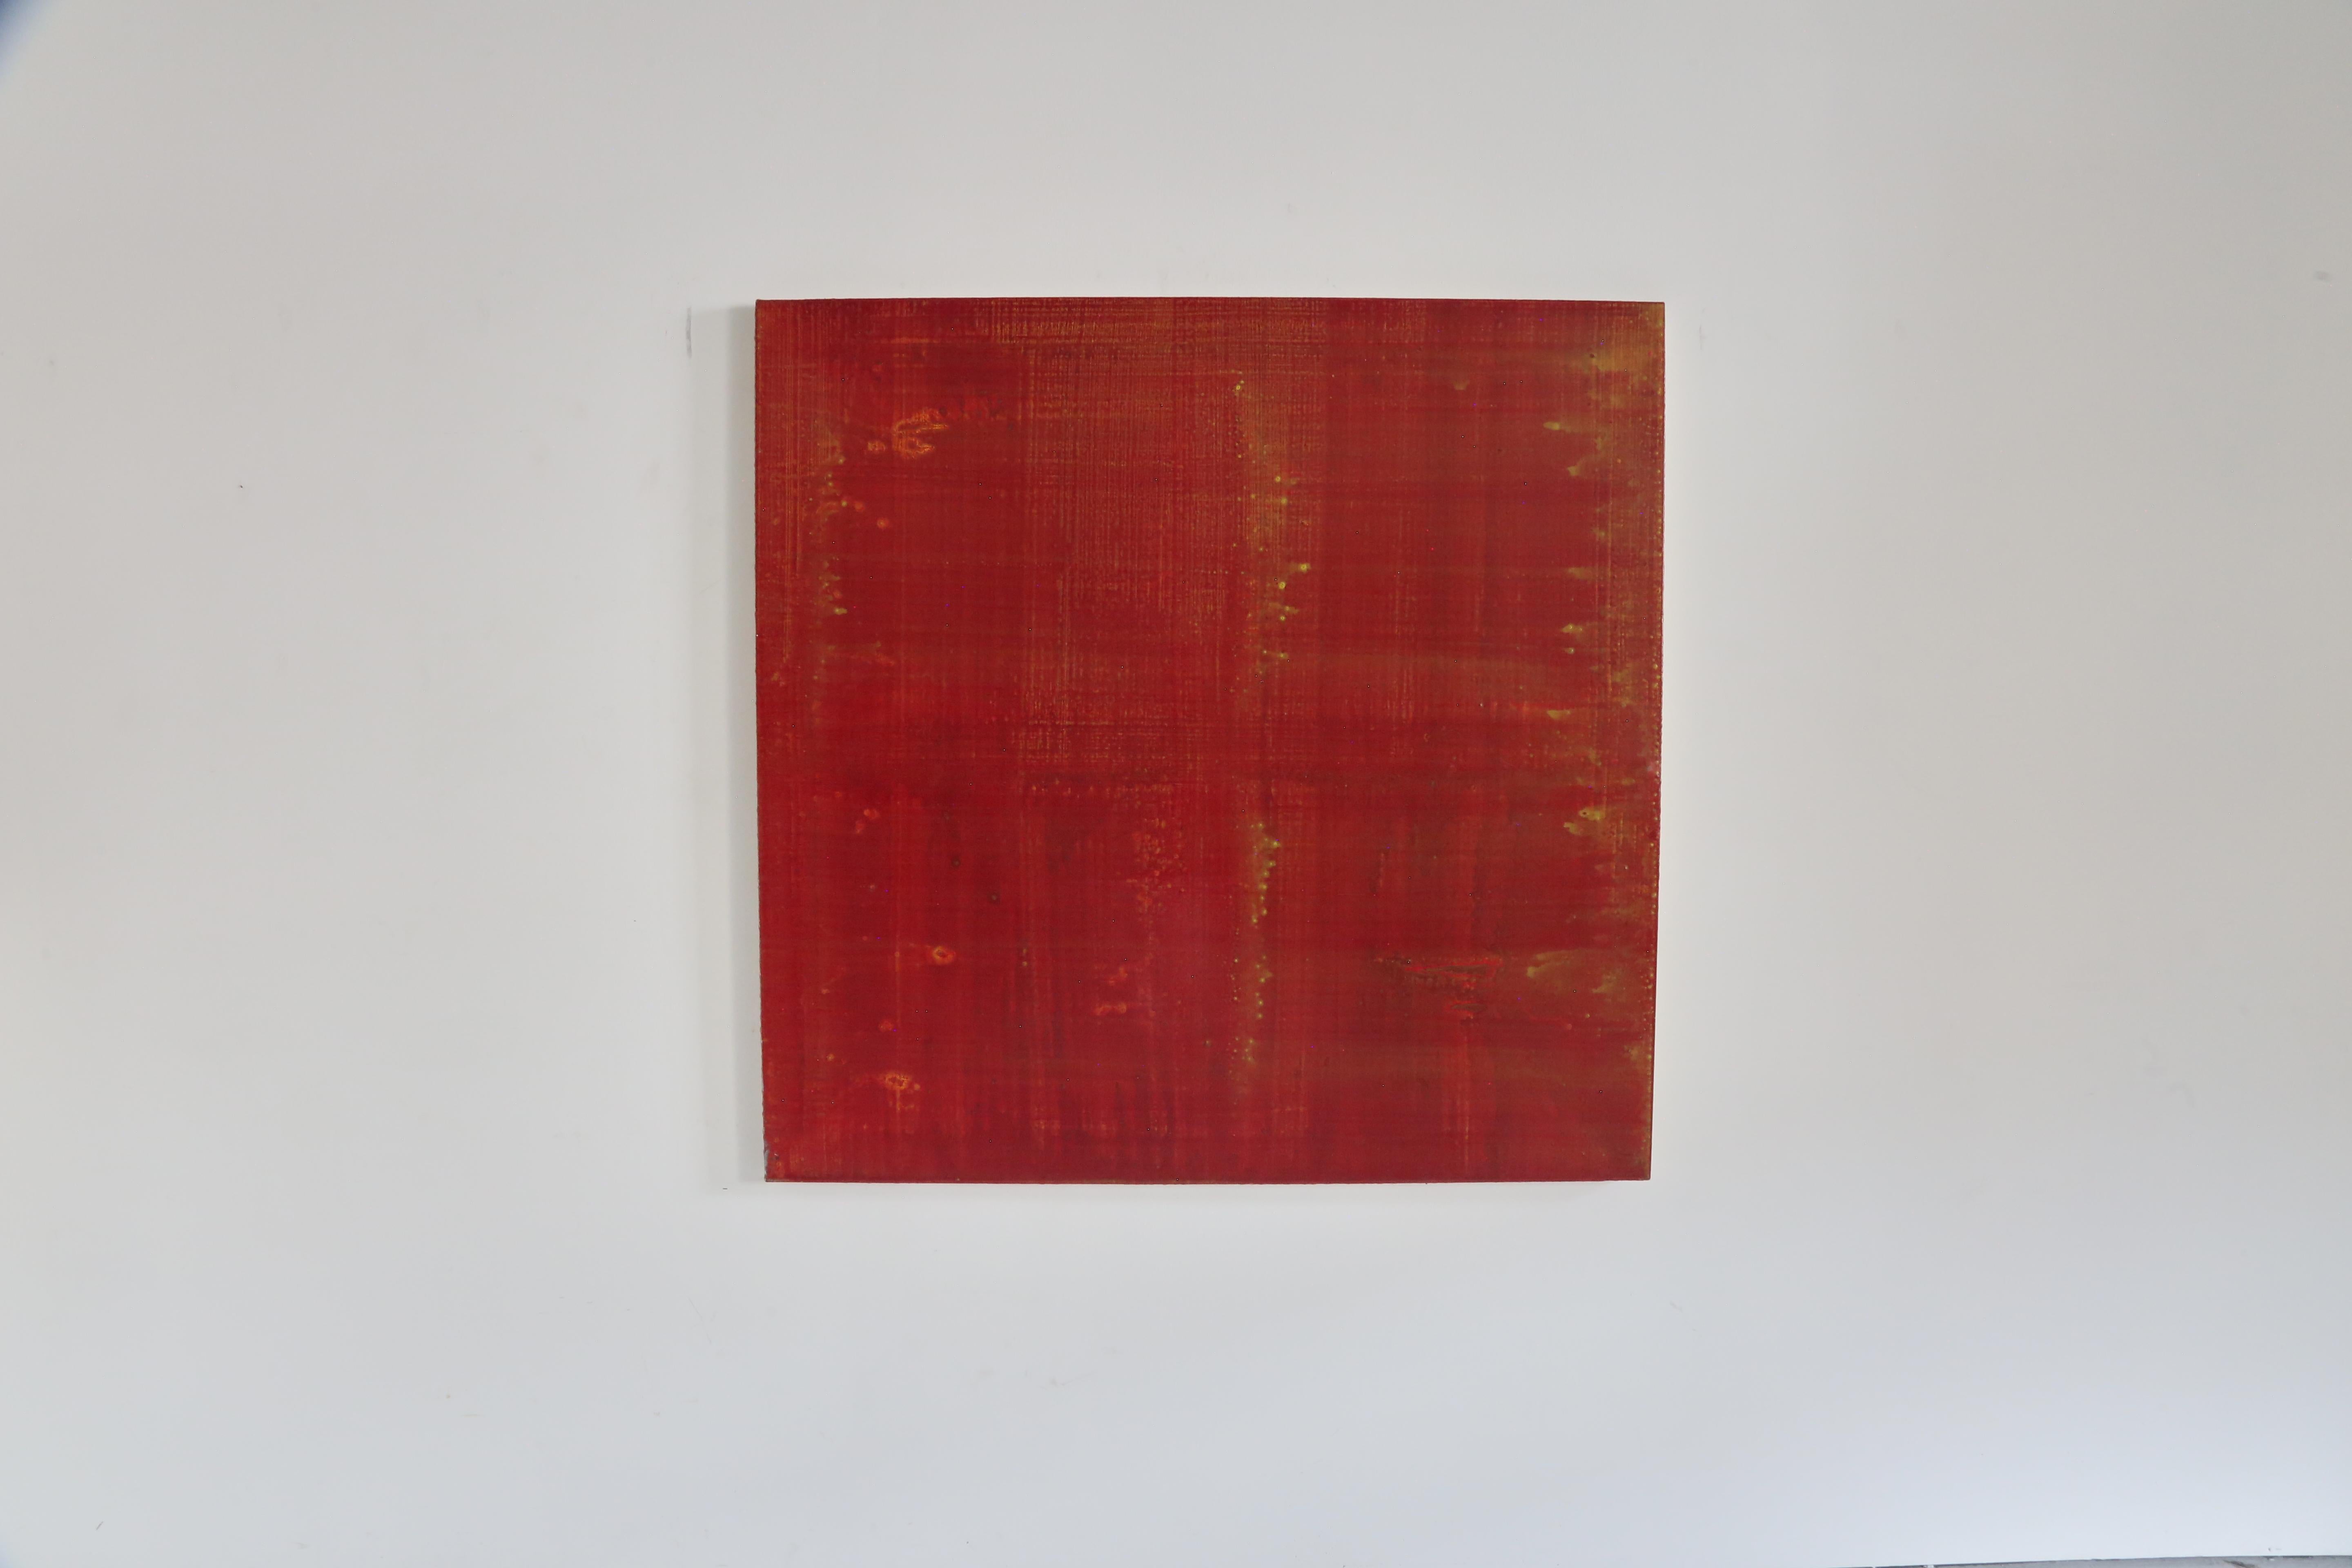 ‘Apparently Red’ by Torie Begg (1962 - 2022). 

Oil on canvas. Signed and dated verso 1997.

W 125cm x H 125cm x D 4cm


London born artist TORIE BEGG was a renowned minimalist painter during the 90’s & 00’s. Best known for her ‘Apparently..’ series